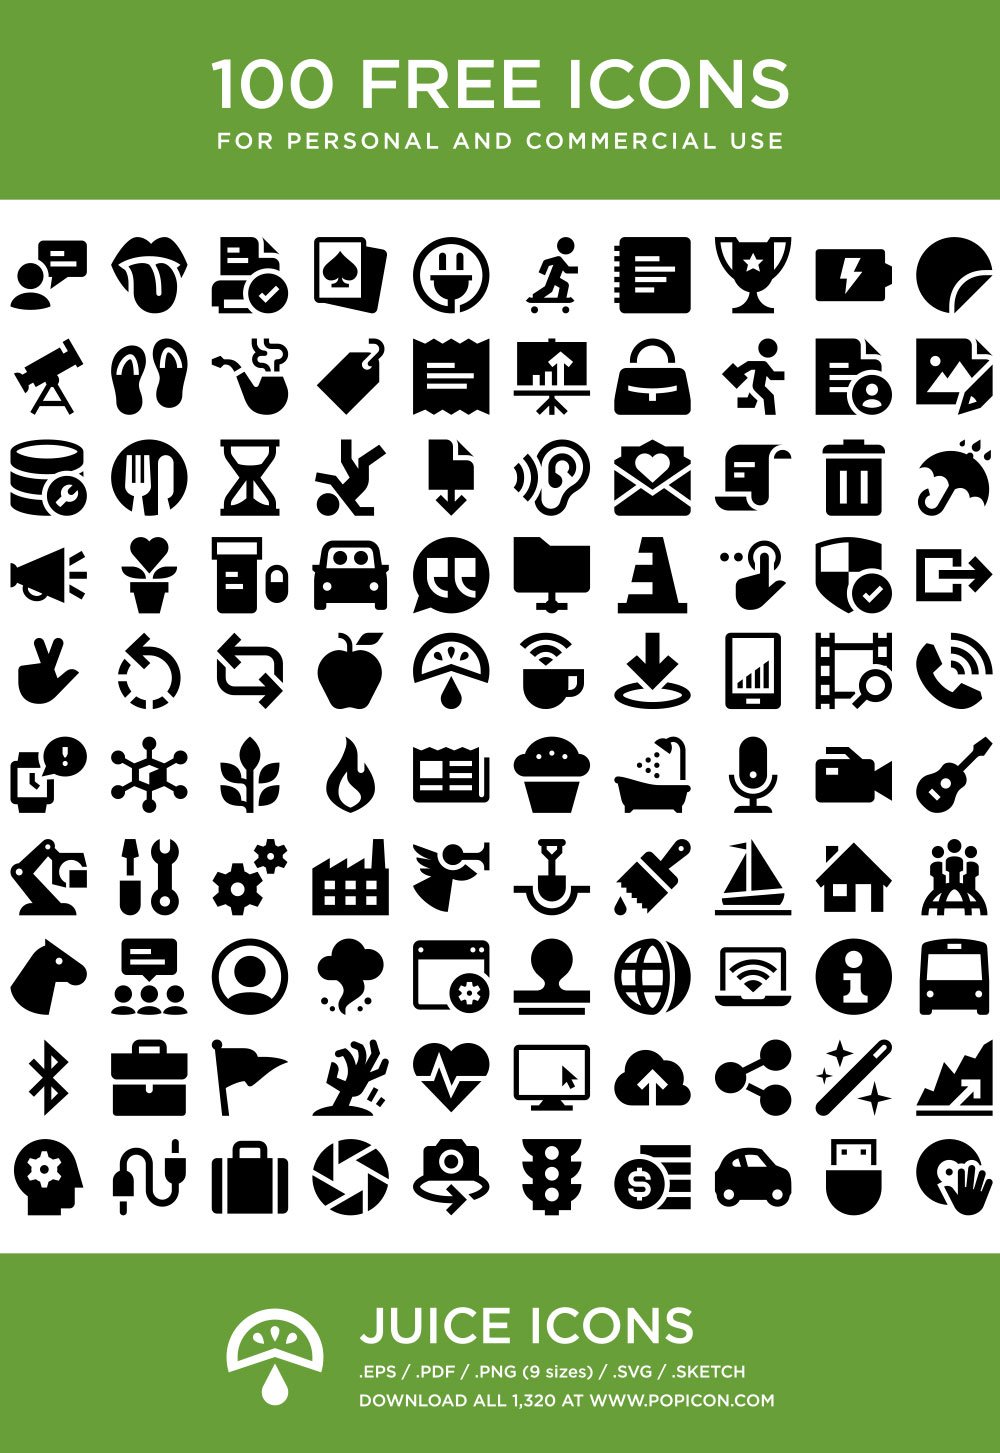 free commercial use icons no attribution